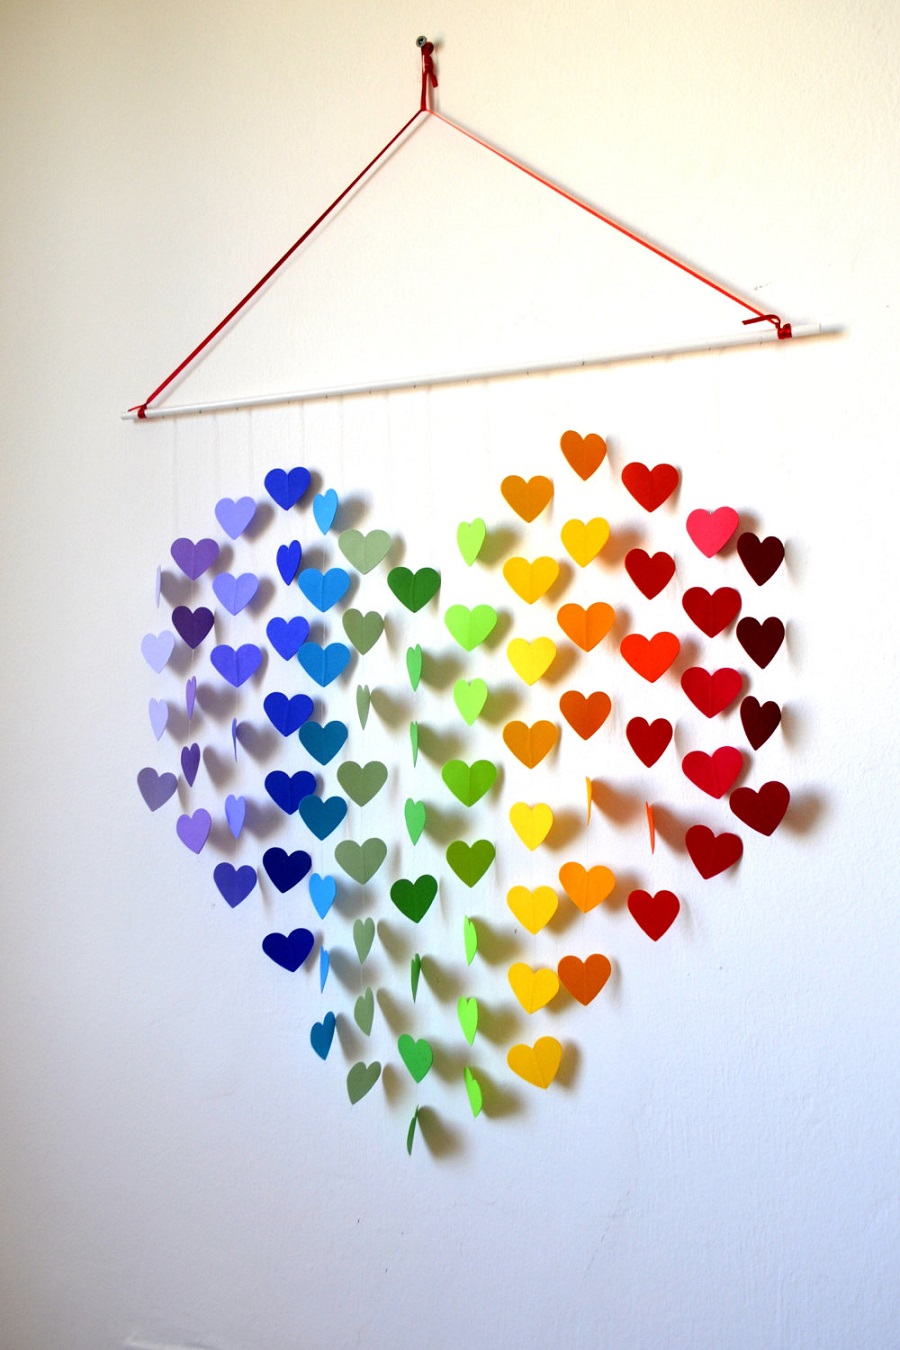 AD-Top-Lively-Rainbow-Decor-Ideas-That-Will-Cheer-You-Up-11